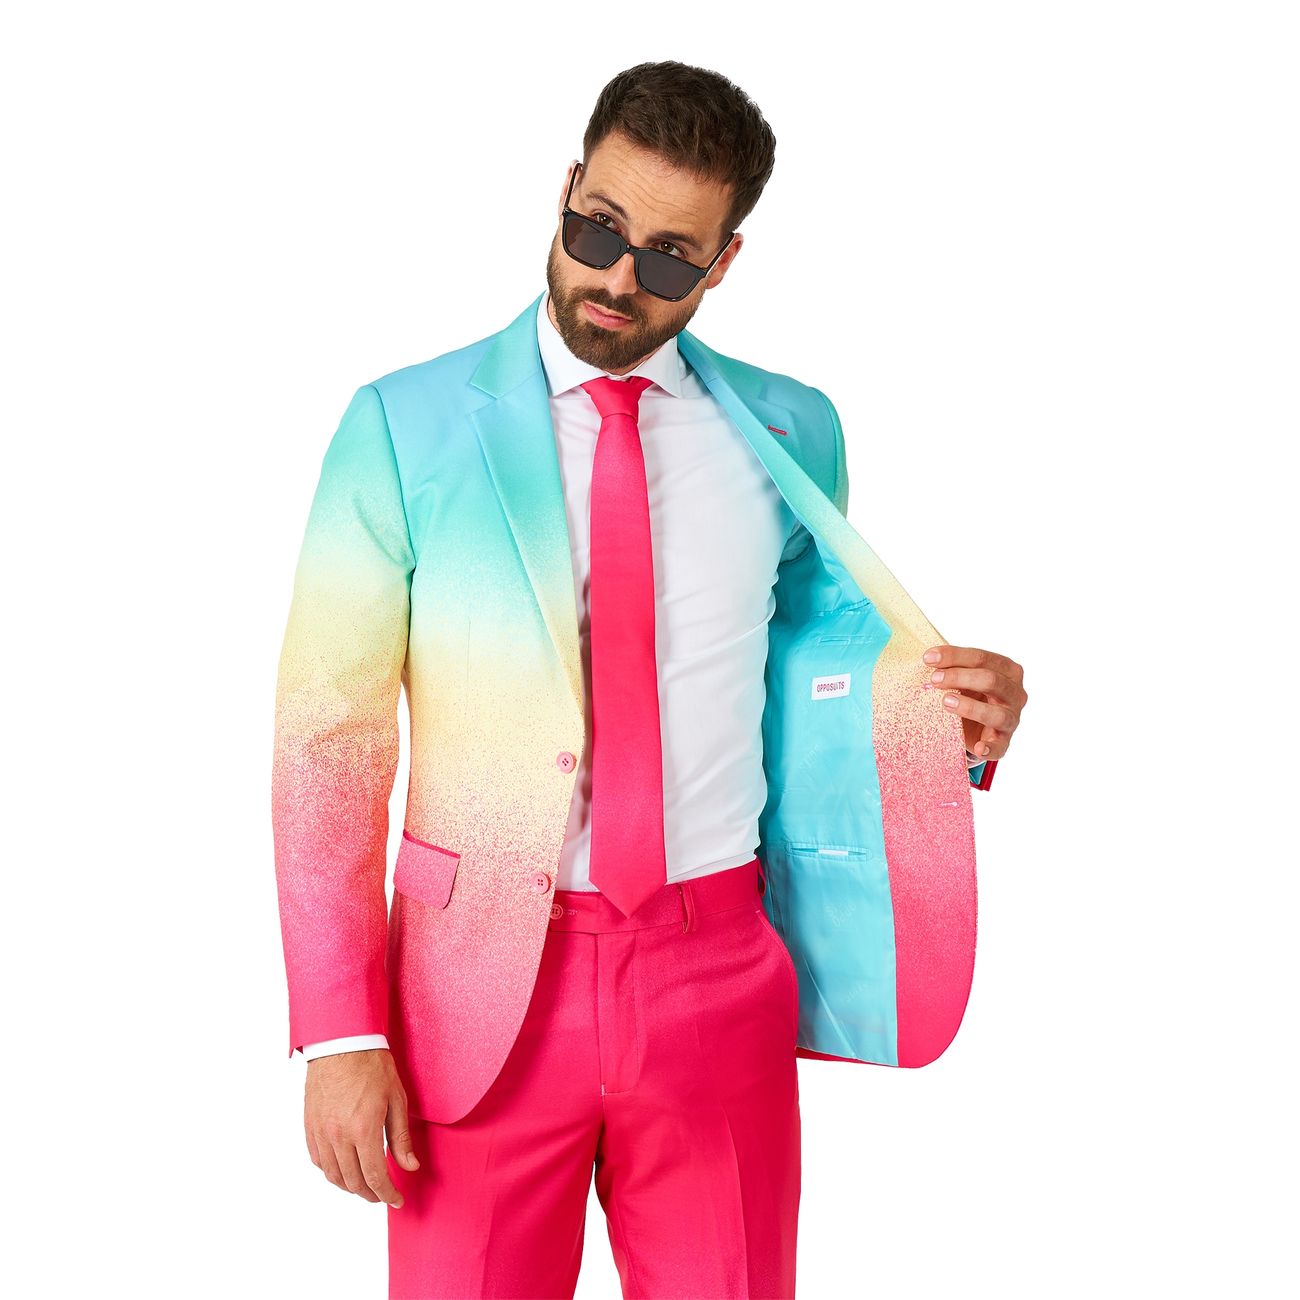 opposuits-funky-fade-kostym-100044-3